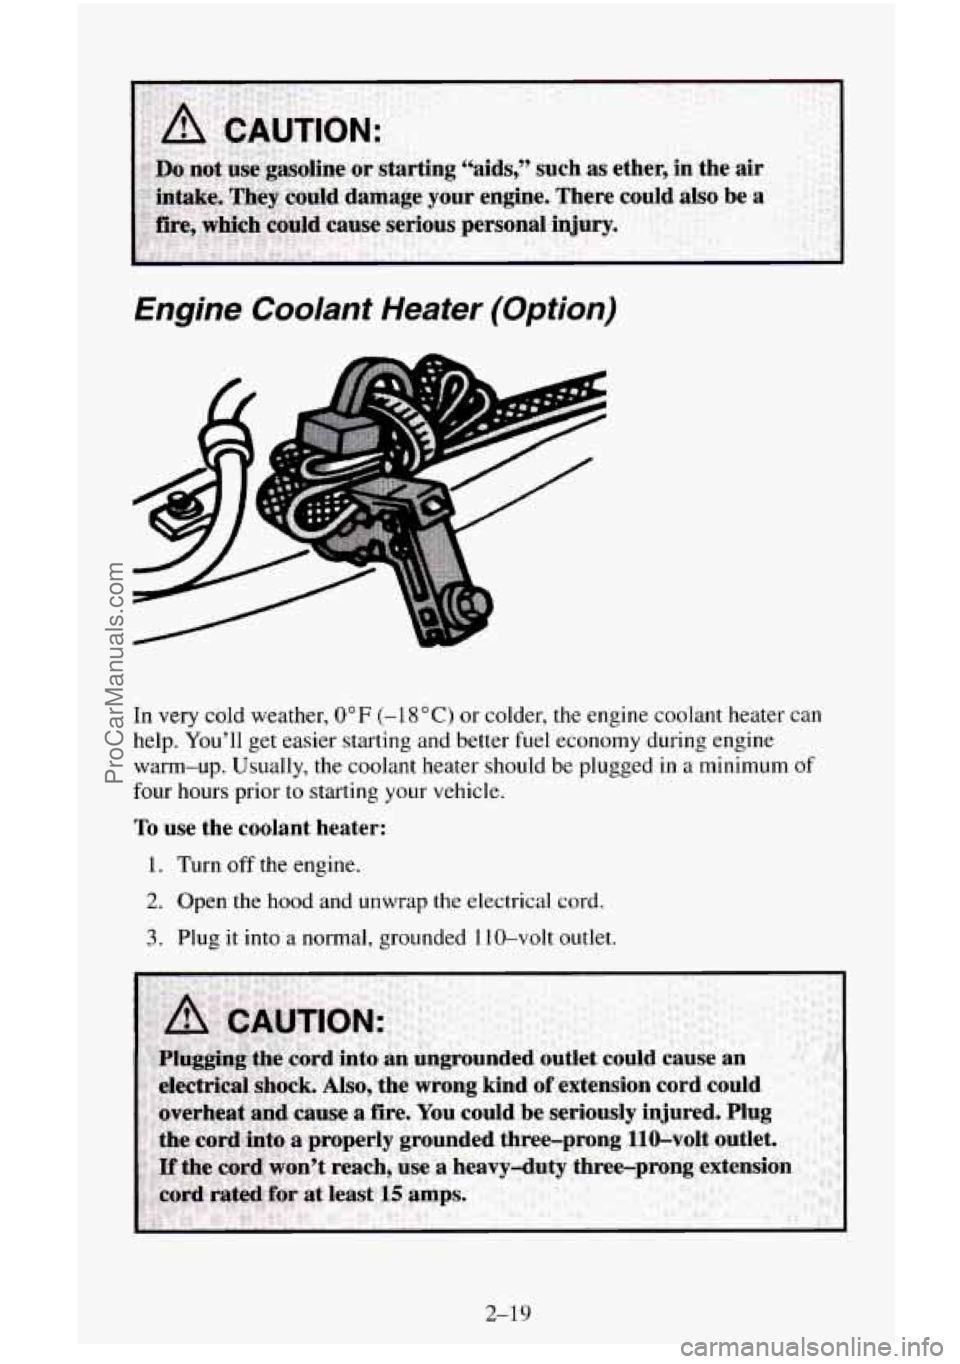 CHEVROLET SUBURBAN 1996  Owners Manual Engine  Coolant  Heater (Option) 
4 
m 
In very cold weather, 0°F (-1 8 "C) or colder, the  engine coolant  heater can 
help.  Youll  get  easier  starting  and better fuel economy  during  engine 
